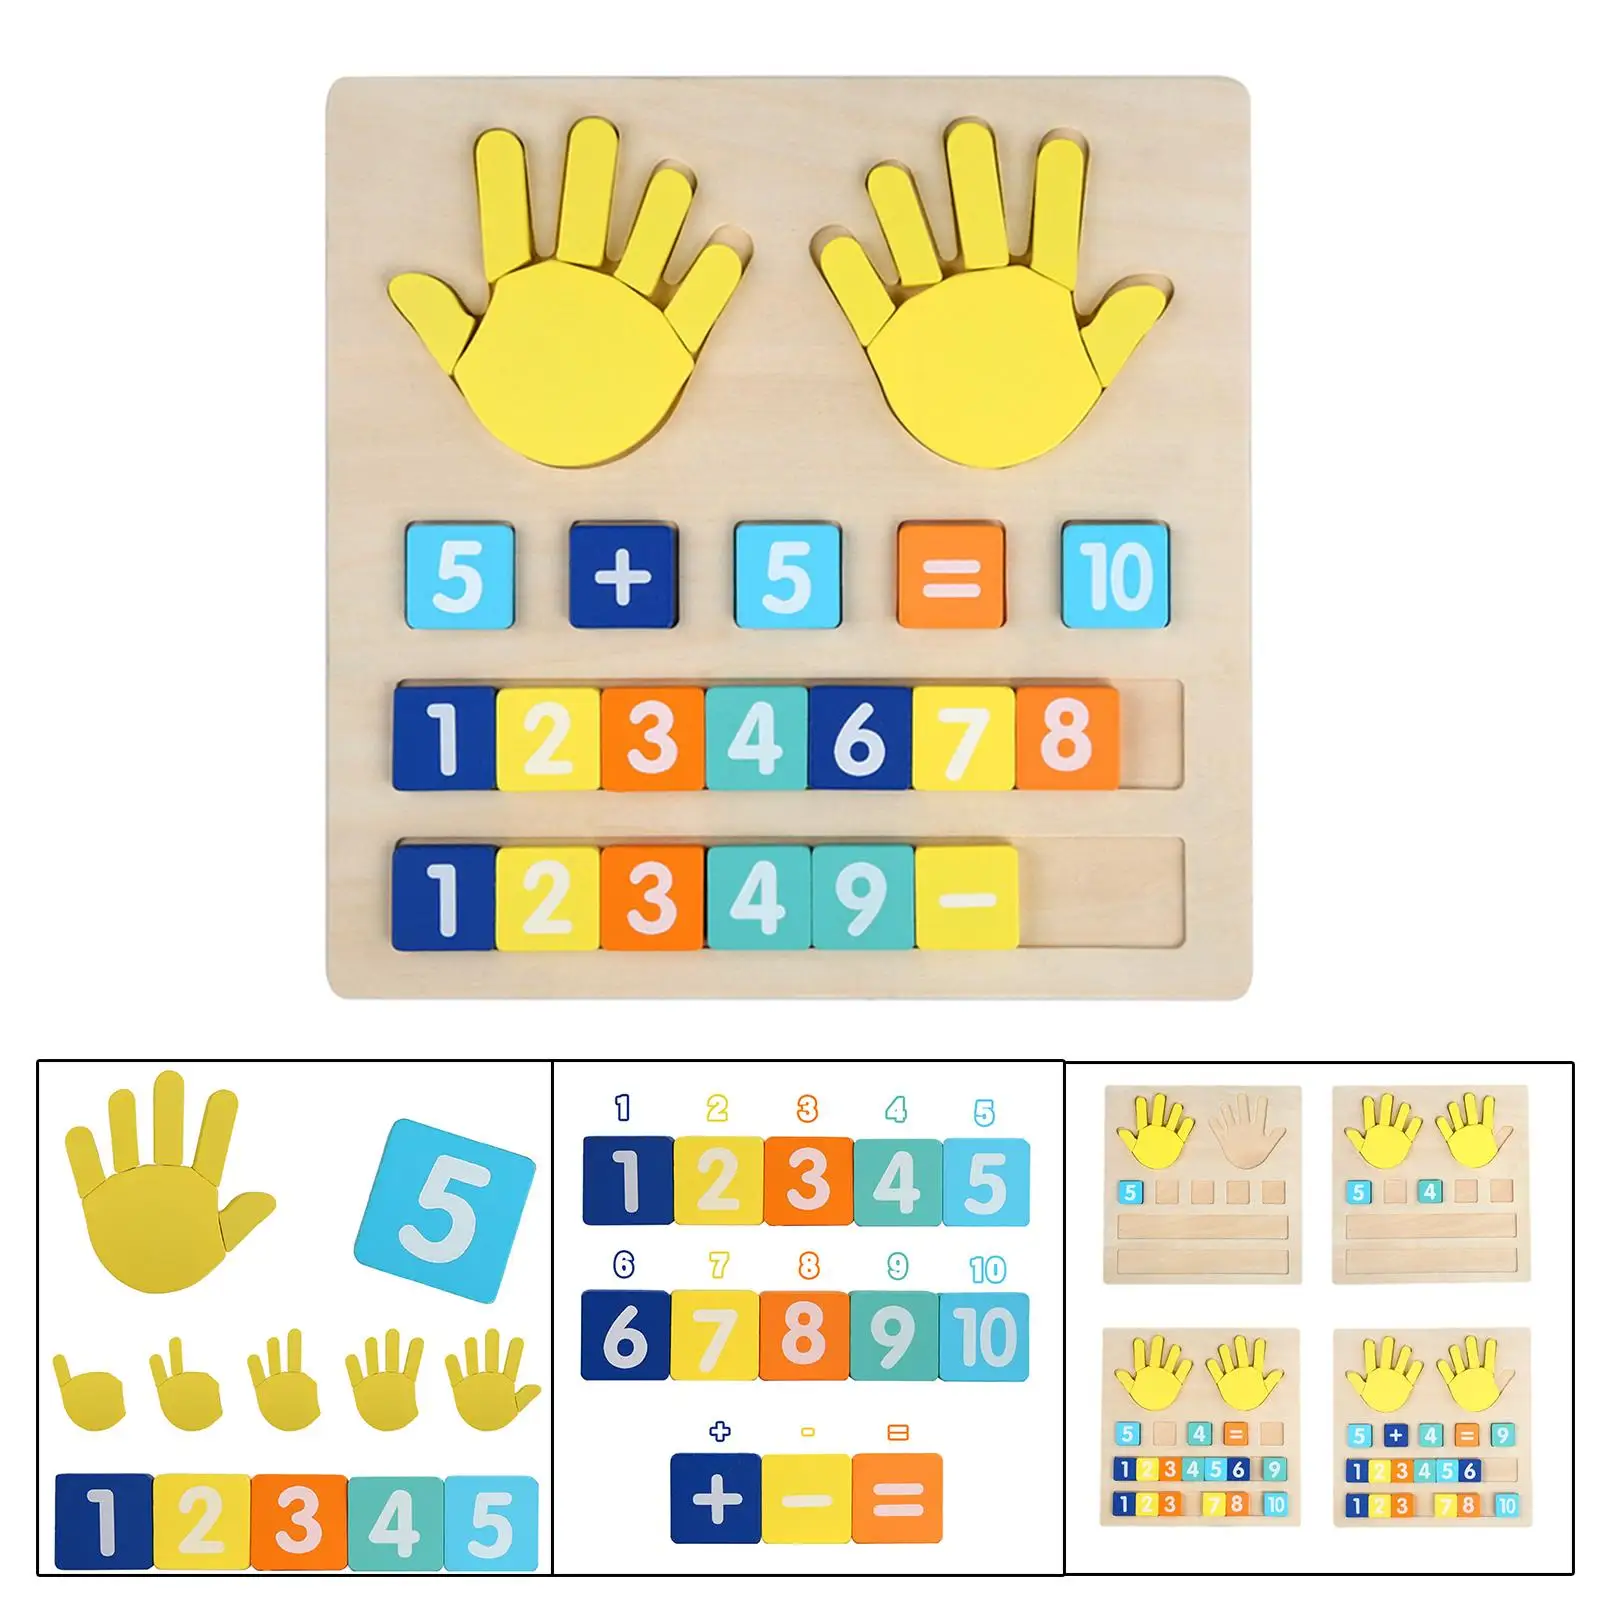 Mathematics Busy Board Learning Wood Finger Numbers Counting Toy for Kindergarten Gift Preschool Activity Cognitive Development